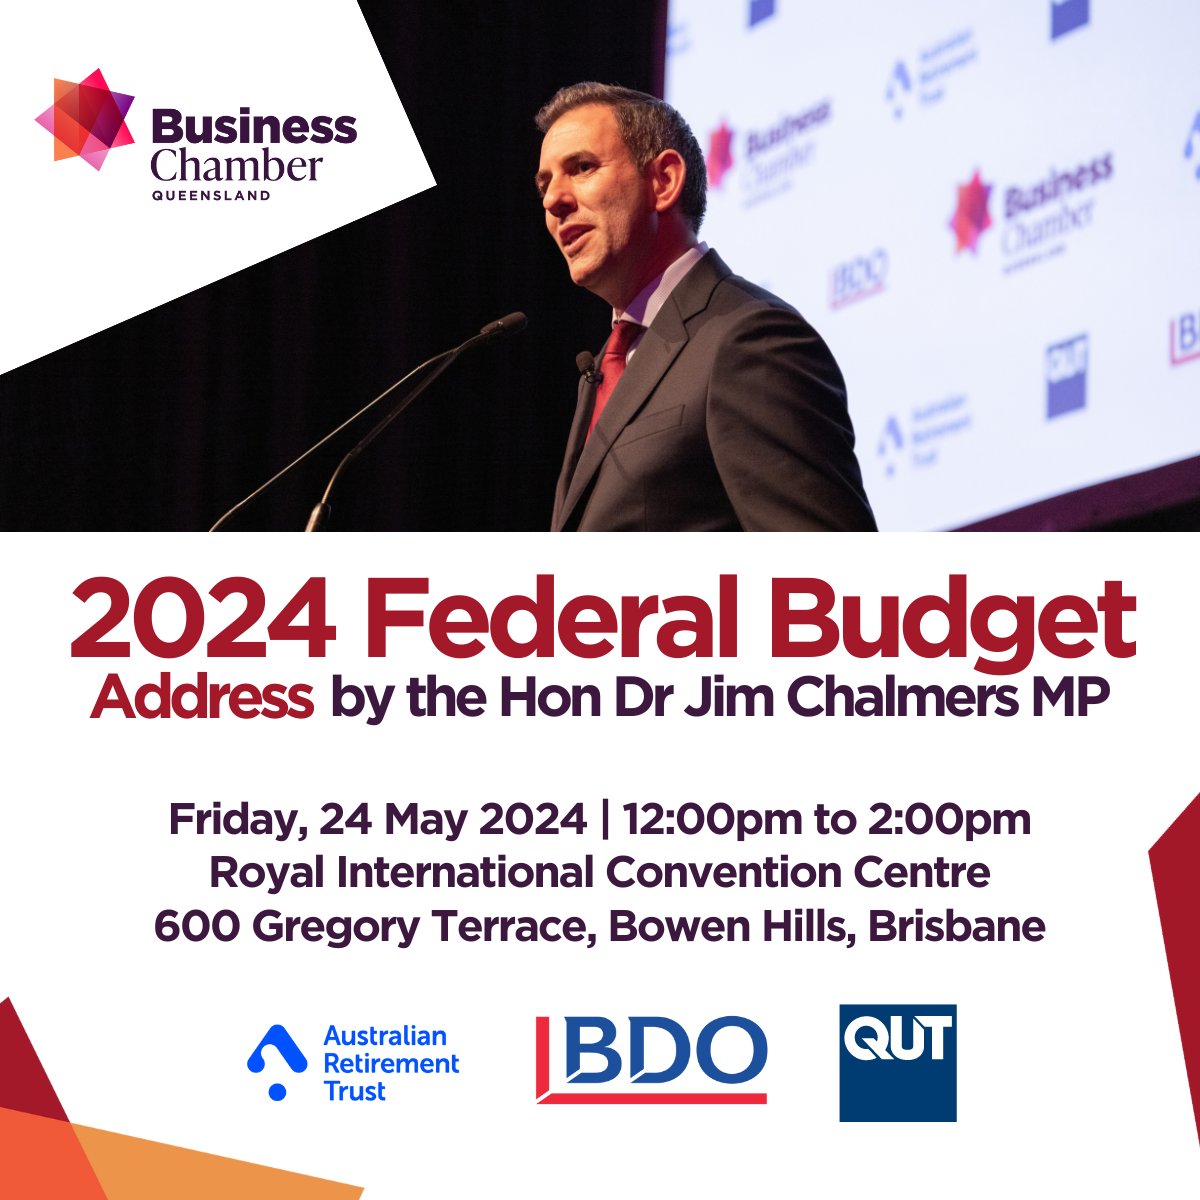 We are delighted to be sponsoring the @ChamberQLD 2024 #federalbudget address with the Hon @JEChalmers. Register now: businesschamberqld.com.au/news-and-resou…
#budget2024